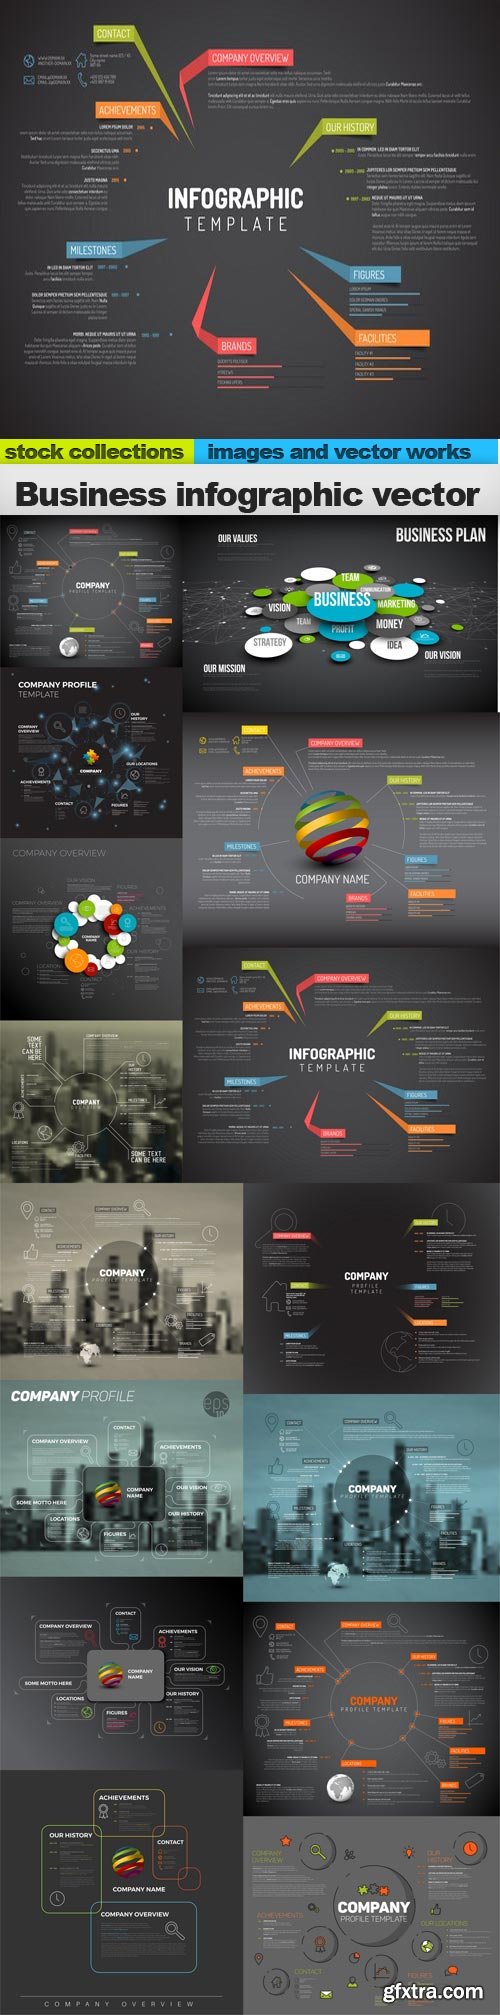 Business infographic vector, 15 x EPS